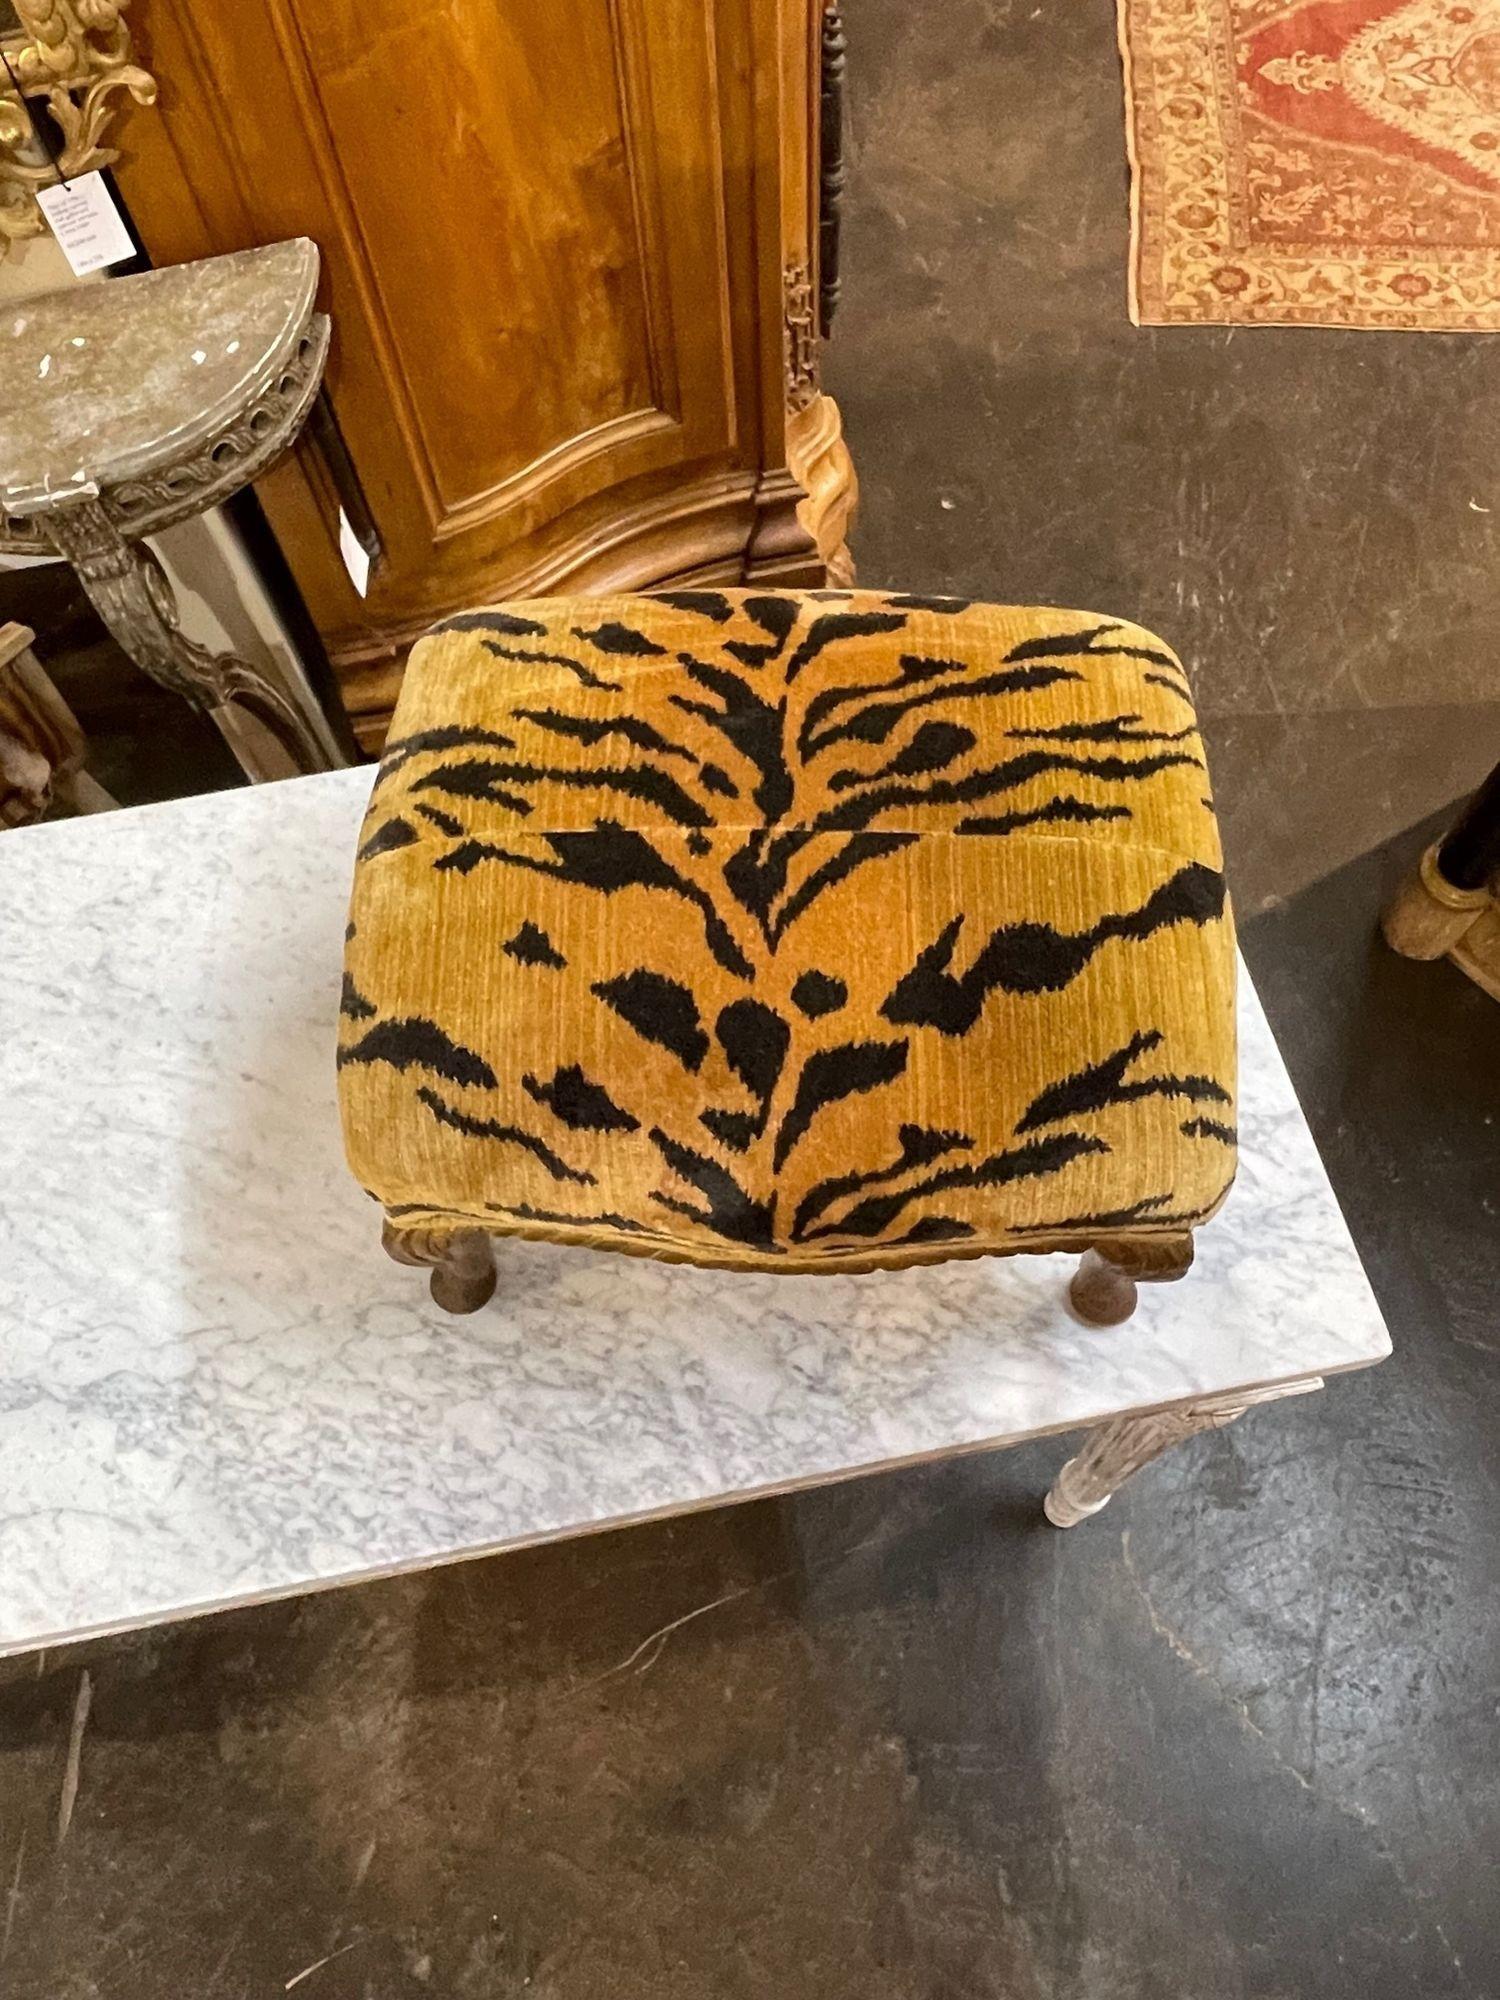 Italian 19th Century Carved and Gilt Wood Stool with Scalamandre Tiger Upholstery